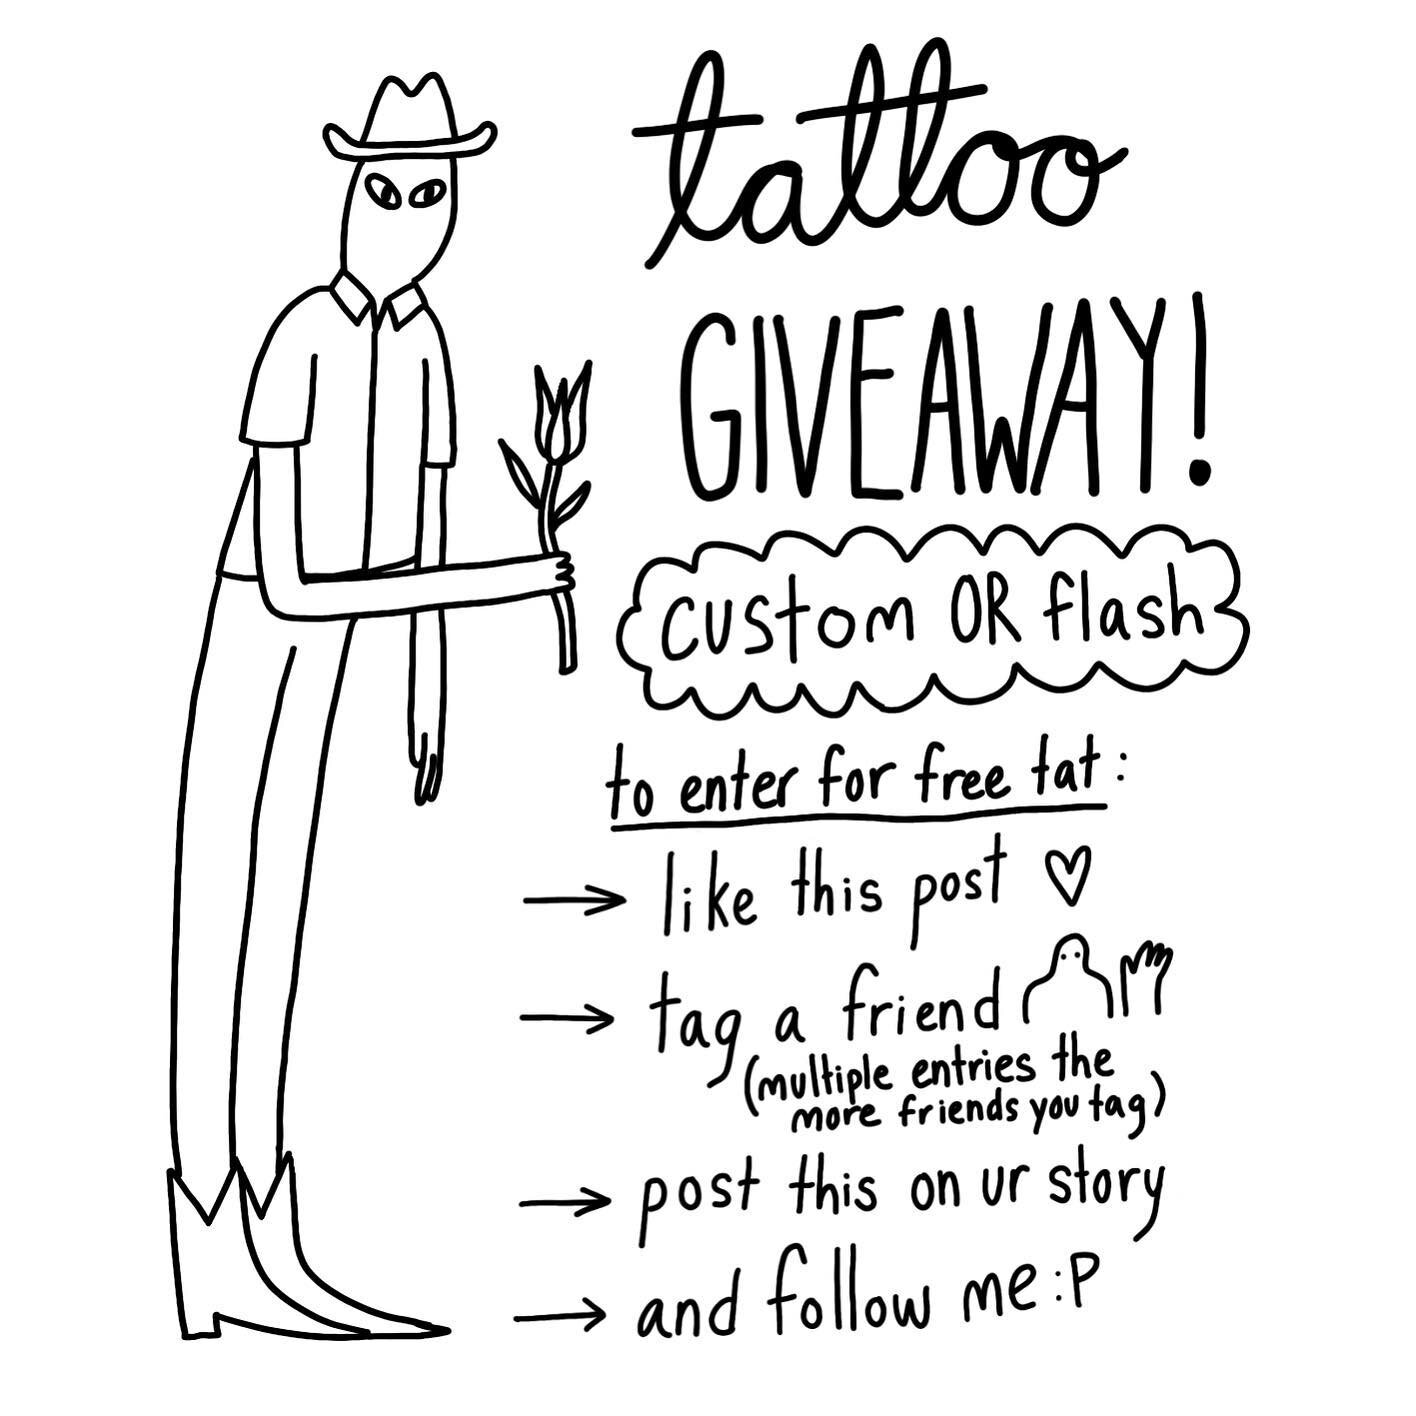 🌷GIVEAWAY🌷
custom or flash or anything u want!
Hi peeps of mtl!! I&rsquo;ve just moved here from Vancouver and it&rsquo;s been a lil tricky finding clients since most of my following is van folks&hellip; sooo if you wanna help a girl out and share 